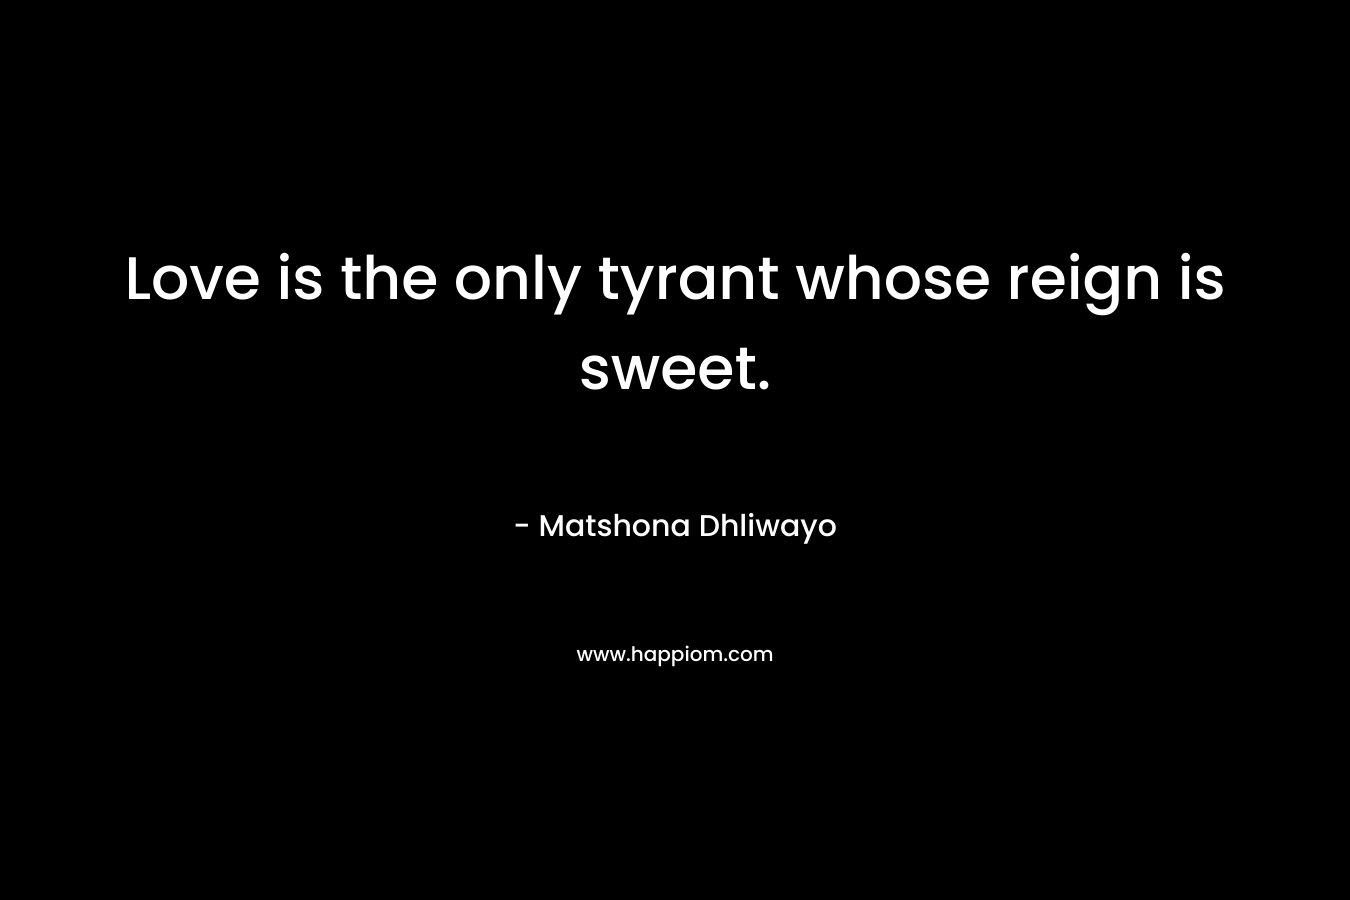 Love is the only tyrant whose reign is sweet. – Matshona Dhliwayo